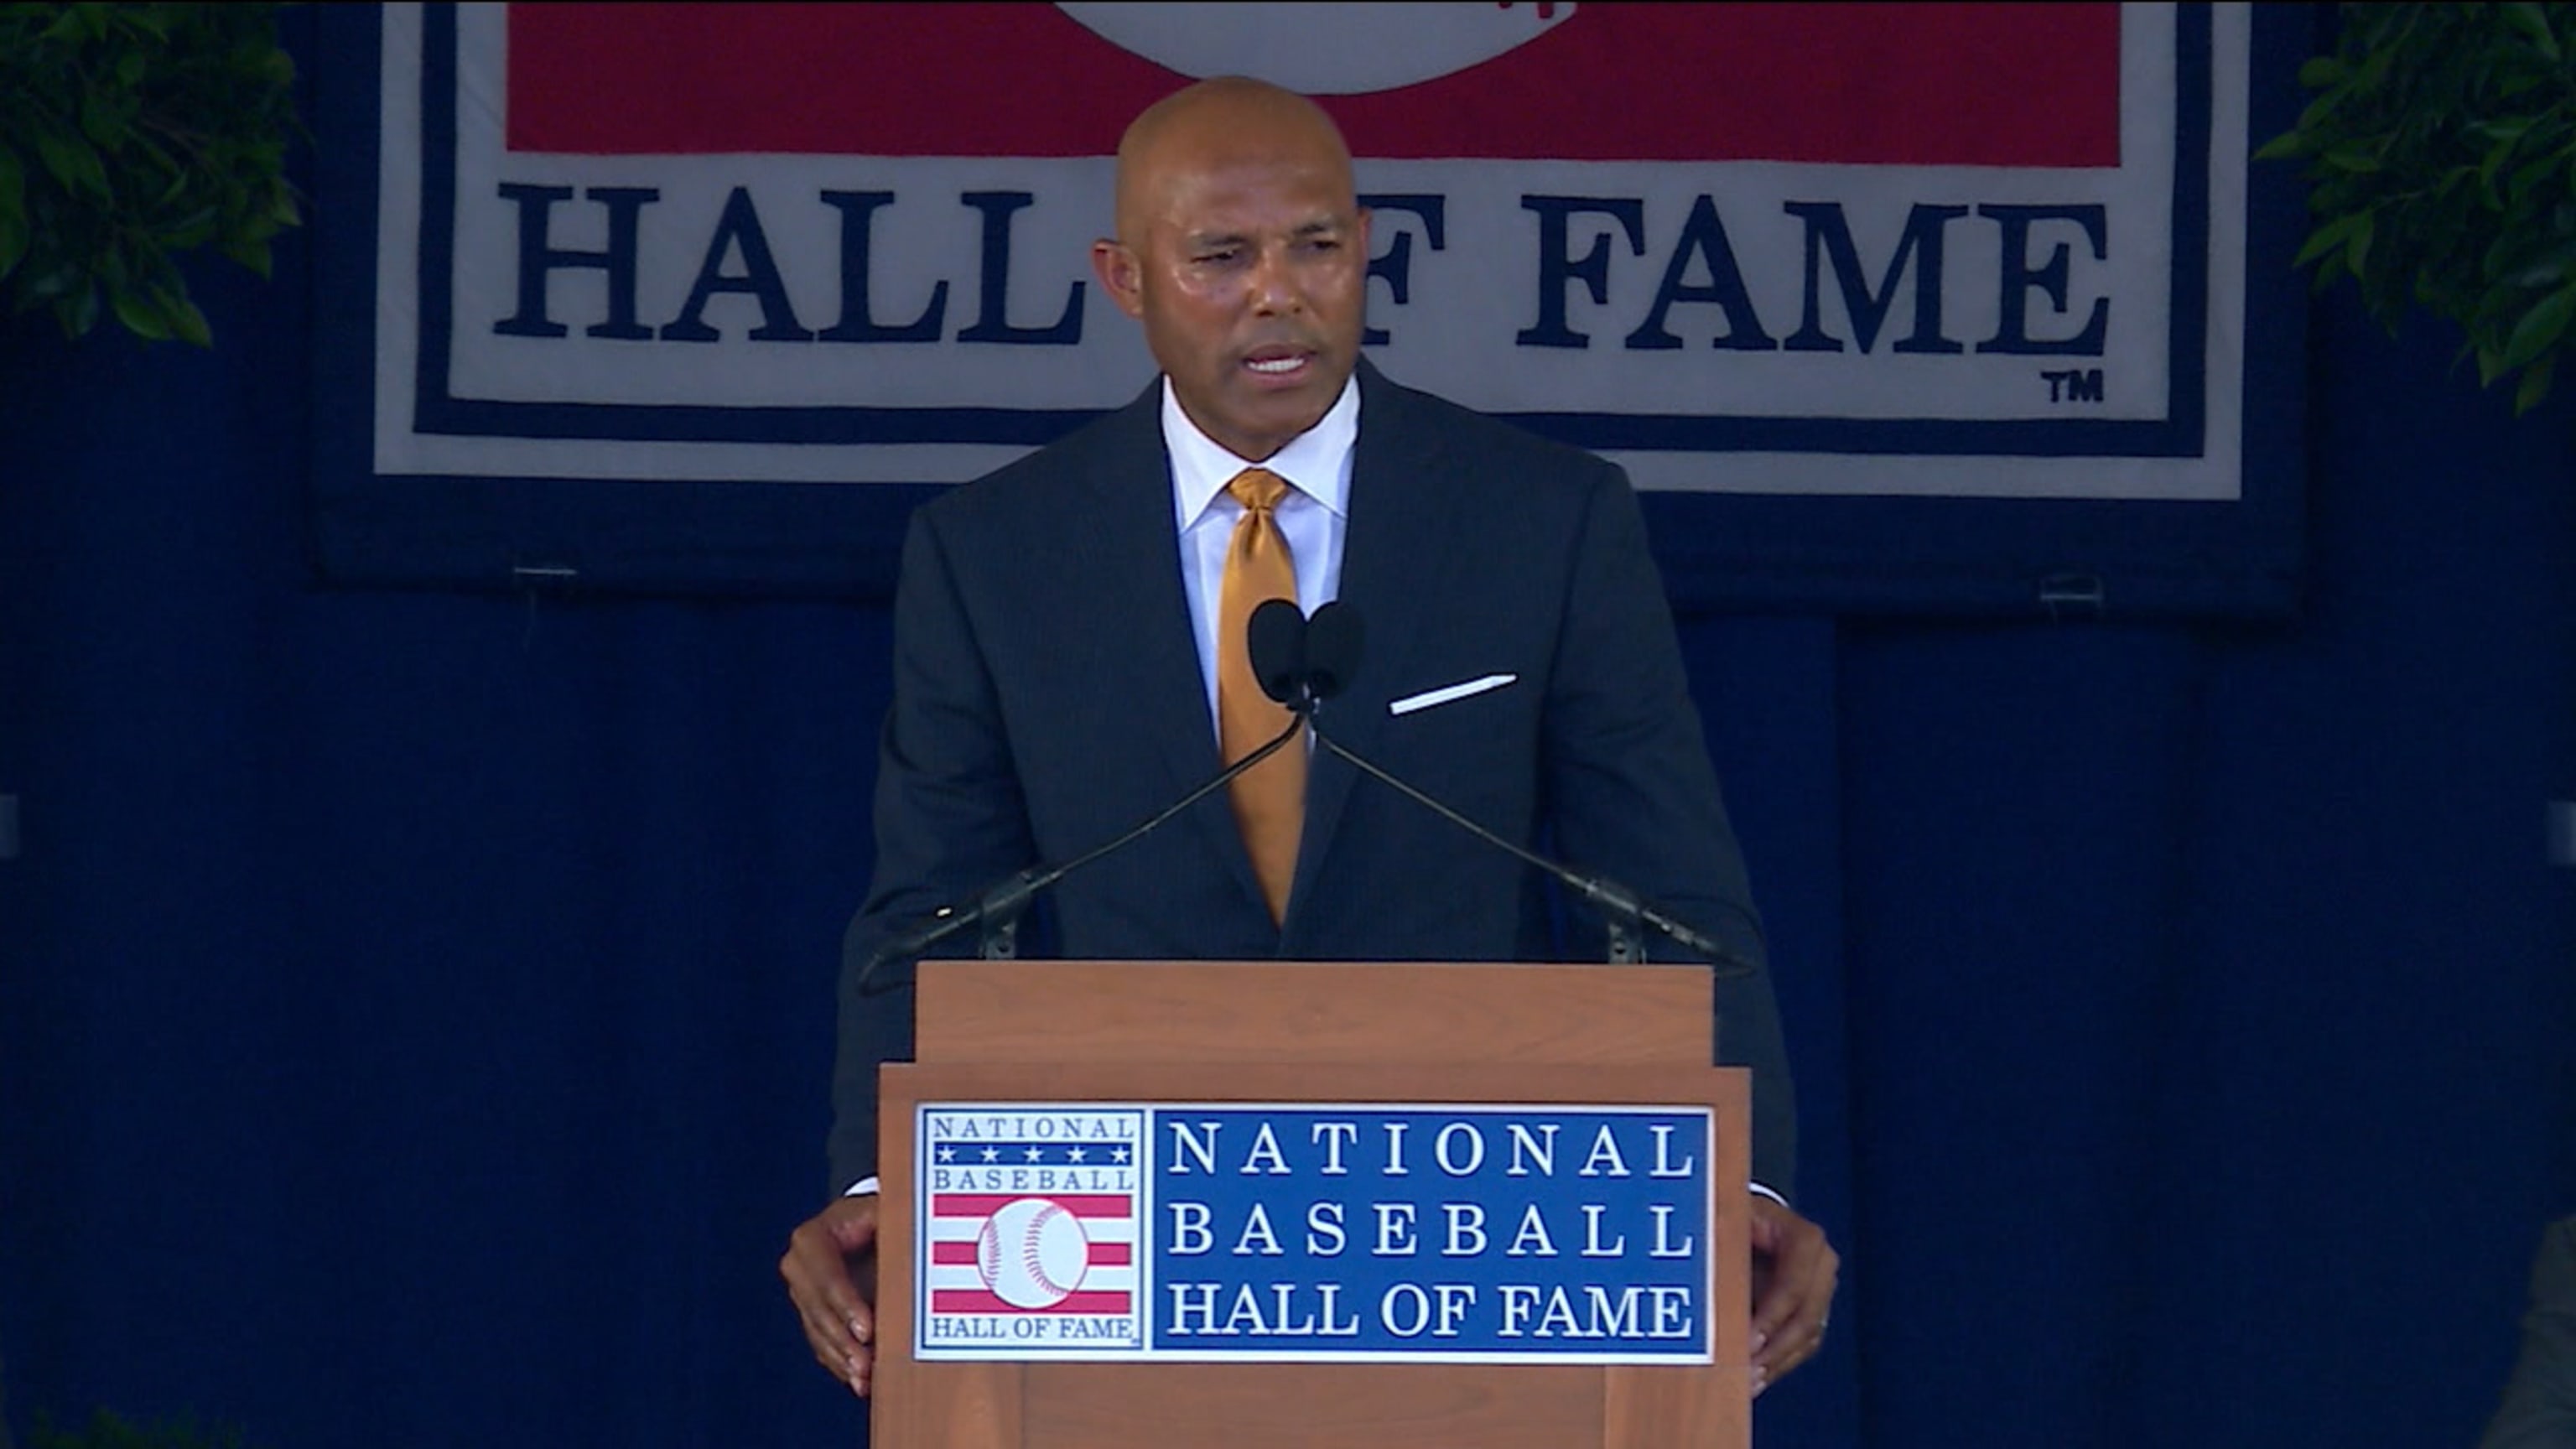 The one word that defines Mariano Rivera's Hall of Fame career